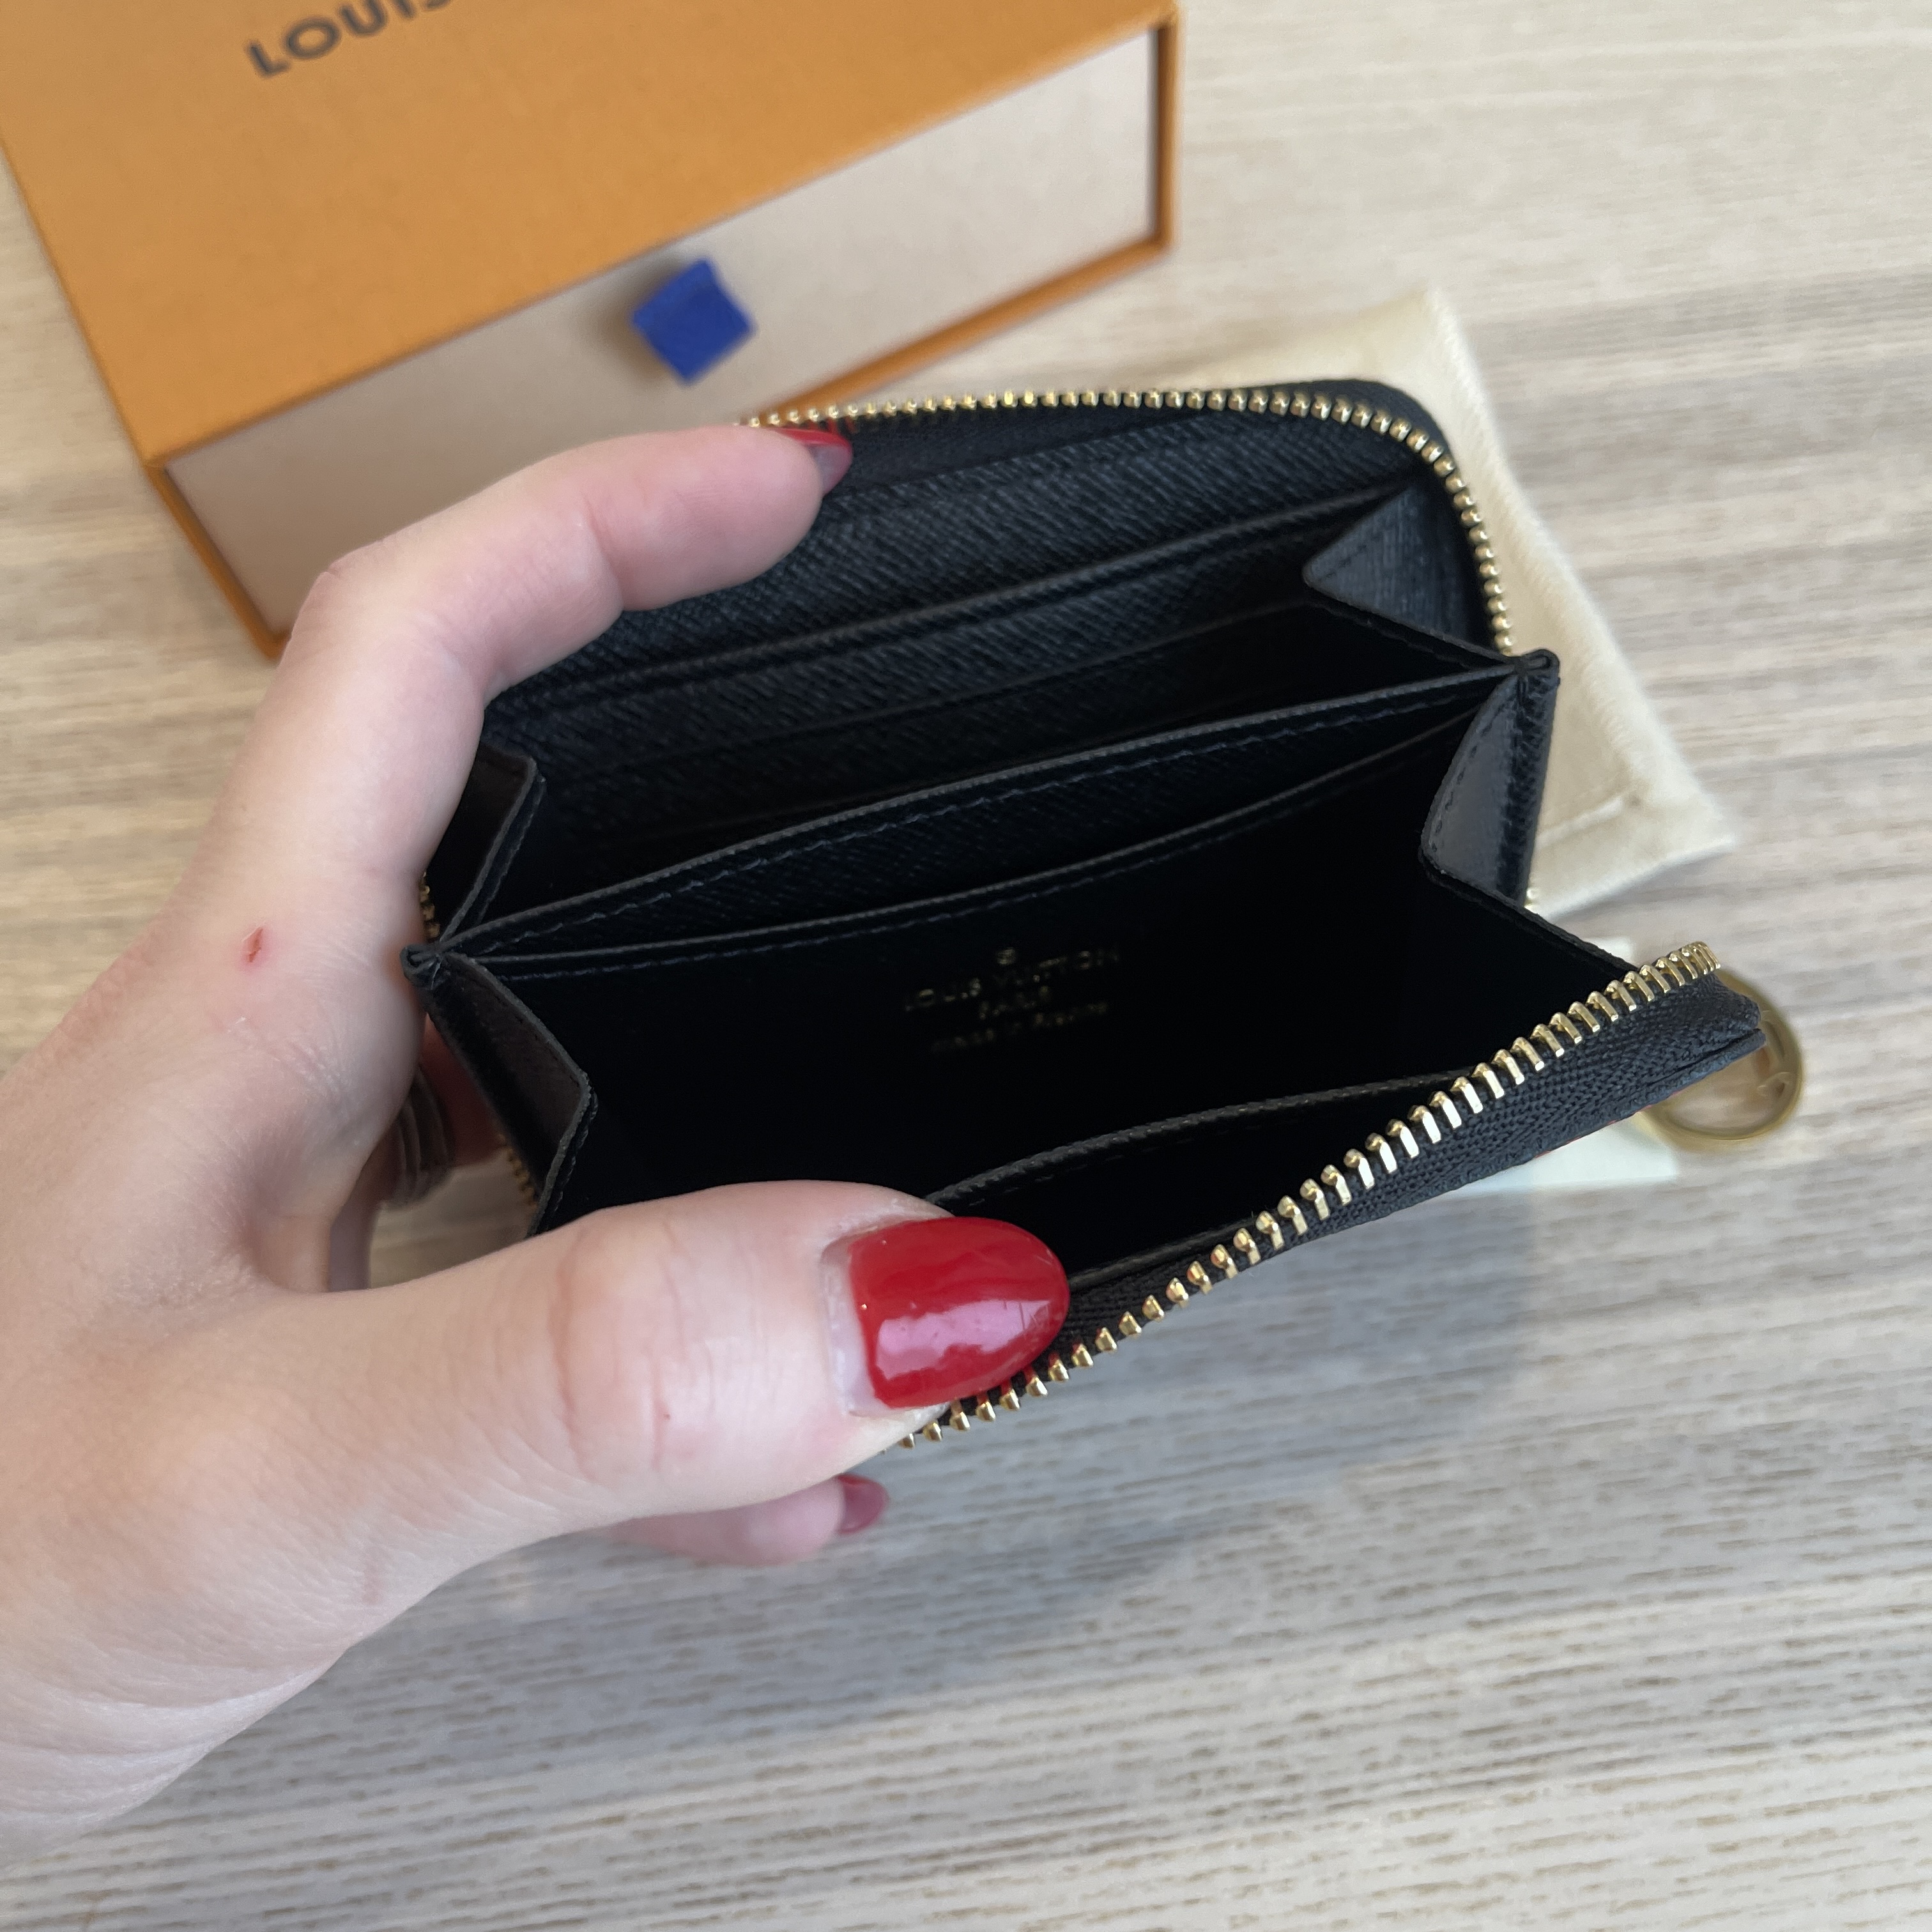 LoveLuxuryPH - Singapore Onhand. Brand New Louis Vuitton Game Zippy Coin  Purse in Noir. Php39,000 full set with gift receipt.